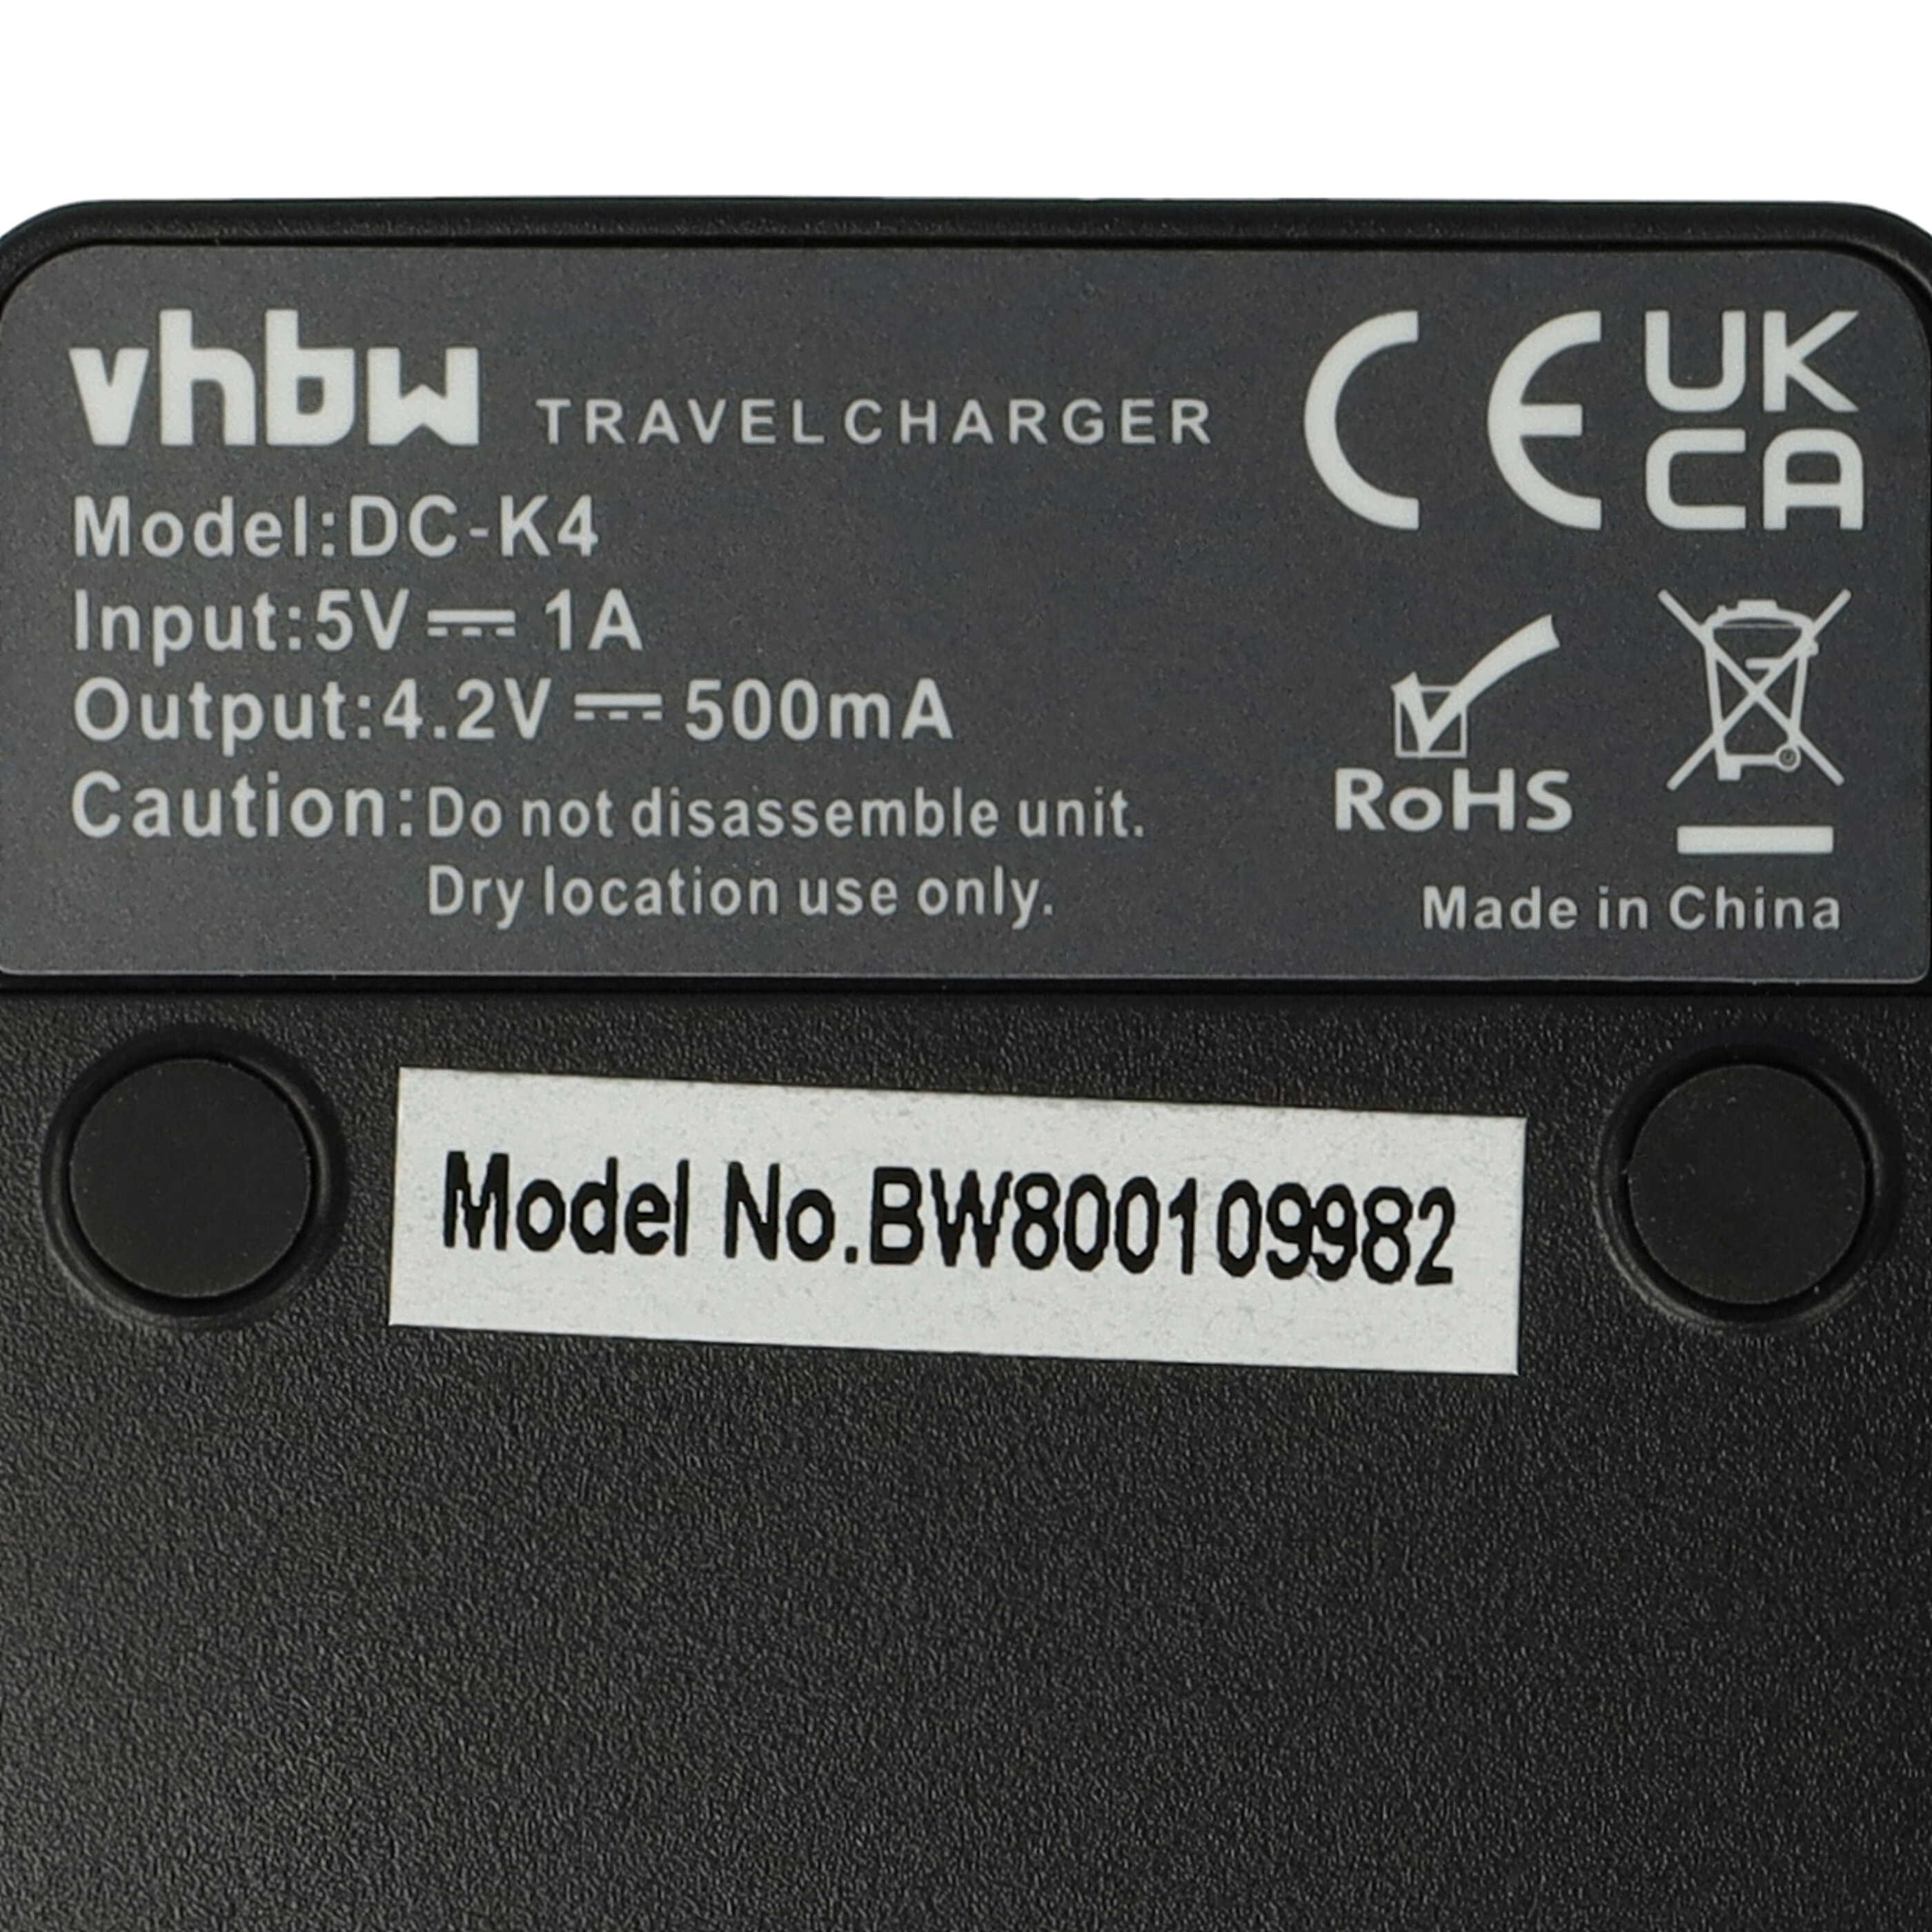 Battery Charger suitable for Lumix DMC-F5 Camera etc. - 0.5 A, 4.2 V